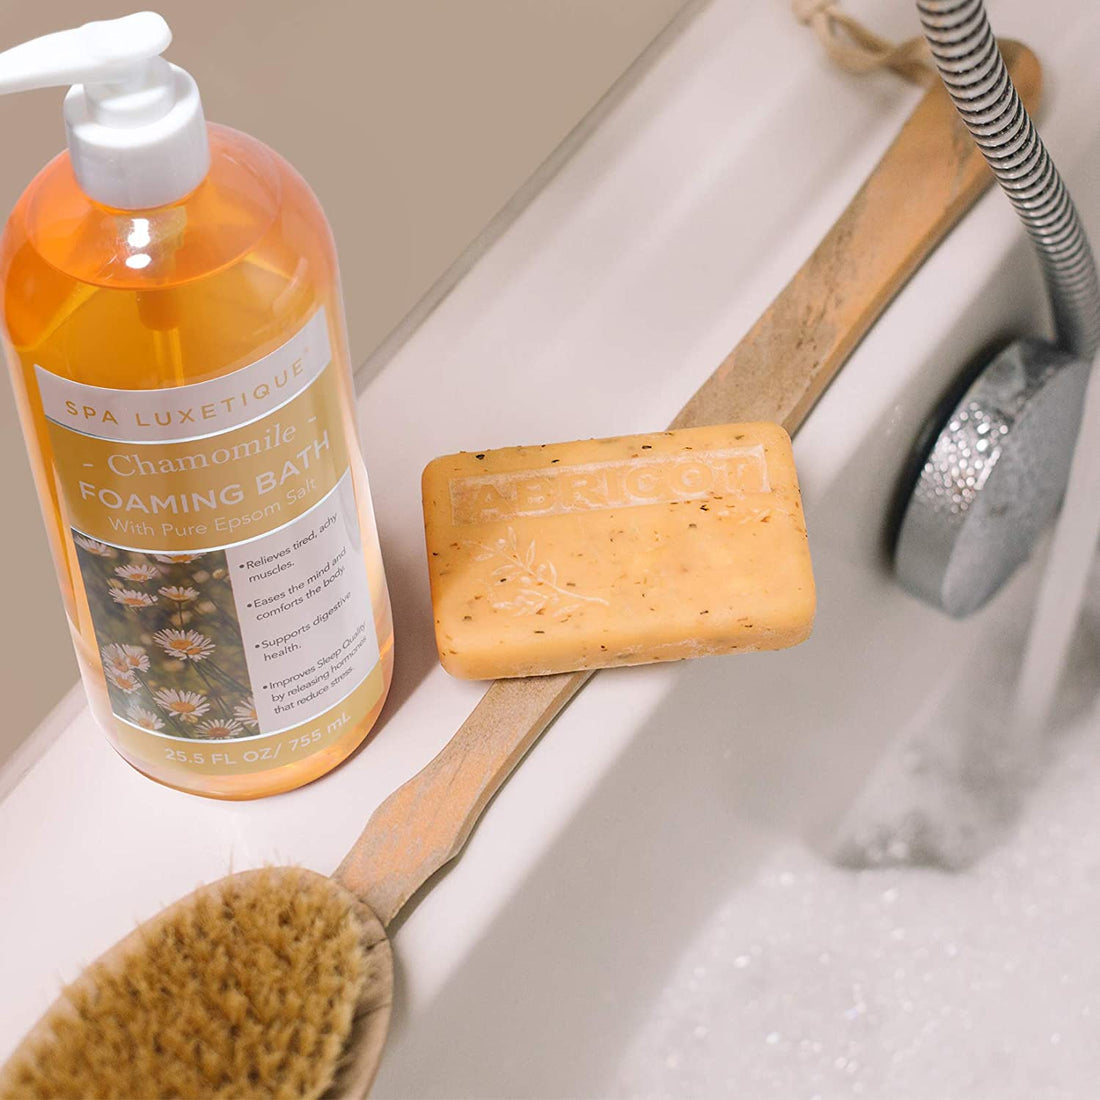 Shower Gel vs Body Wash: Which One is Best for You?